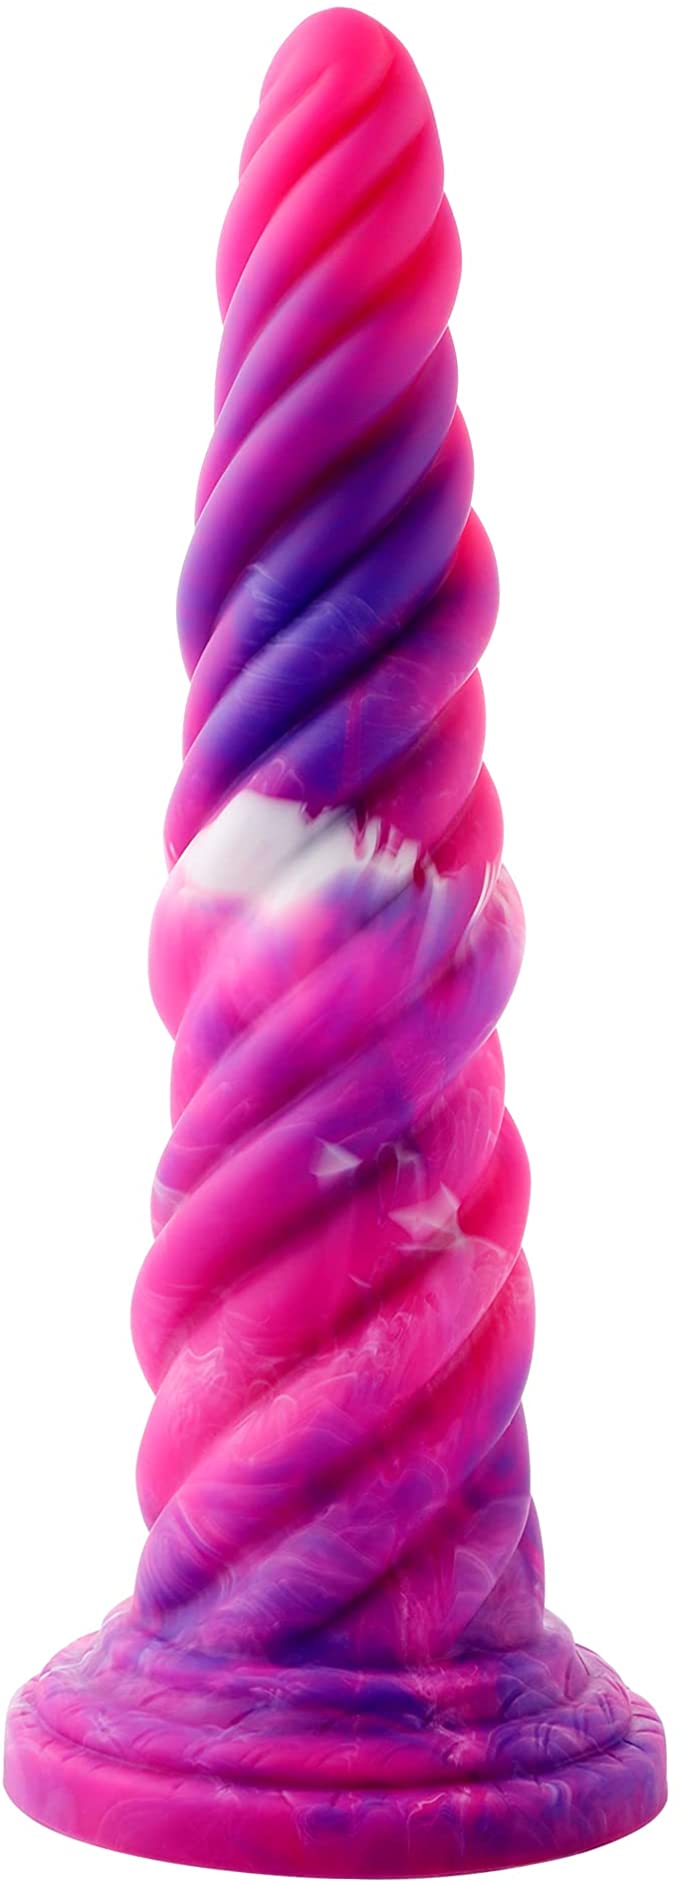 Realistic Dildo, Hismith 10.12 inch Silicone Huge Penis with Suction Cup for Women Hands-Free Play, Flexible Cock Curved Shaft for G-spot and Anal Play Adult Sex Toy